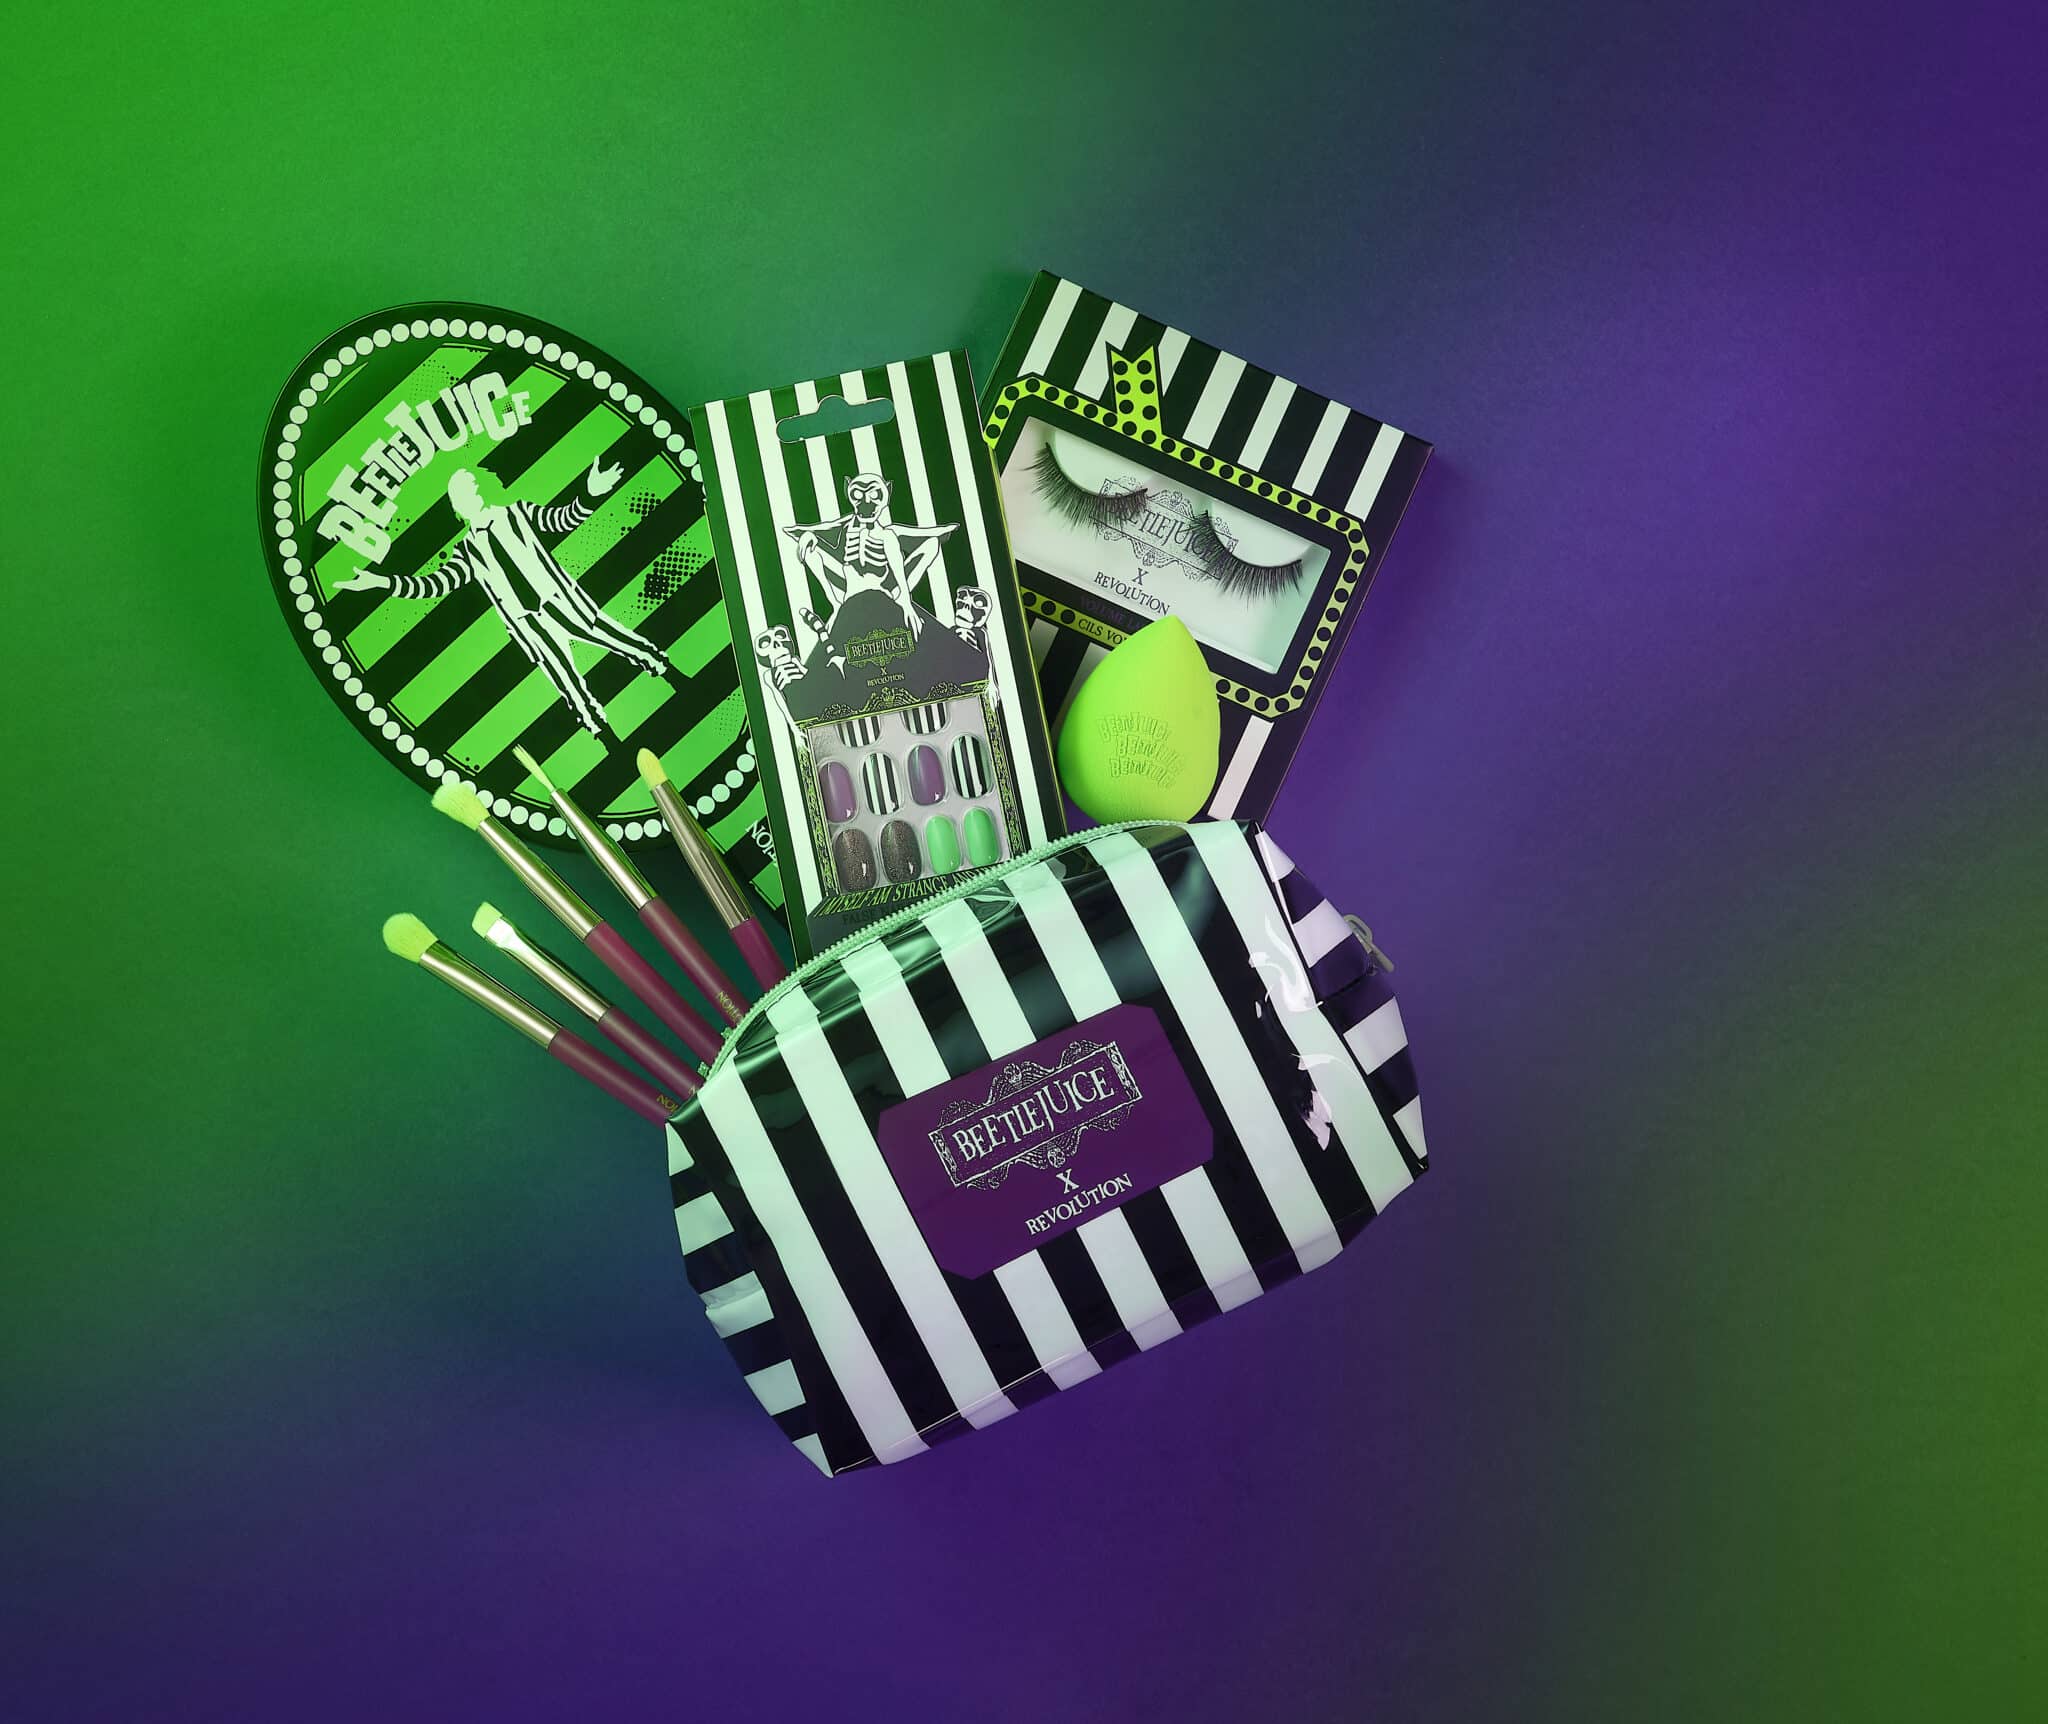 The collection features Beetlejuice-themed accessories including a makeup bag and mirror.